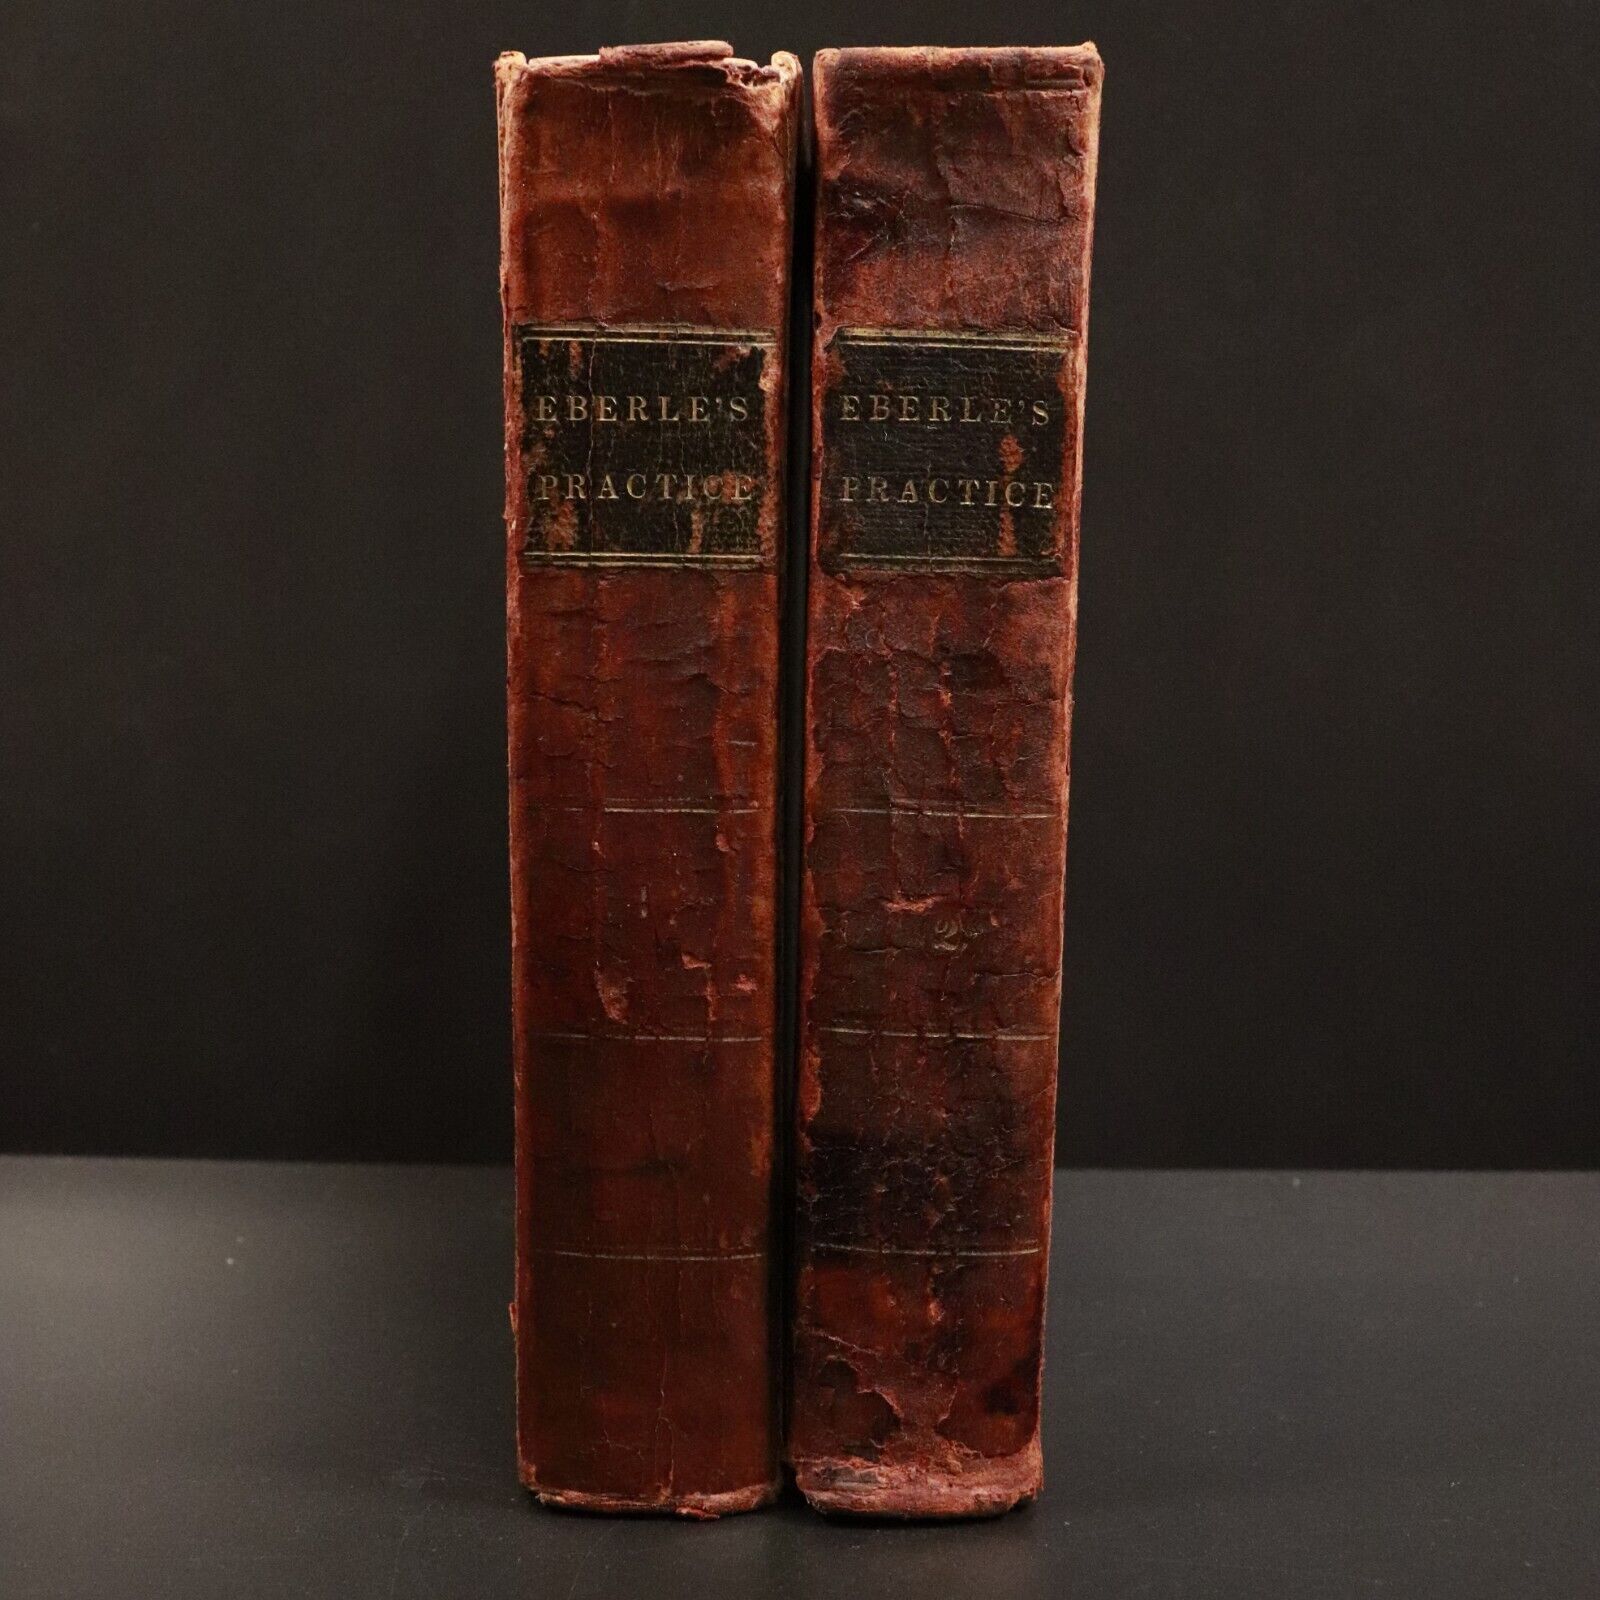 1838 2vol Treatise On Practice Of Medicine Antiquarian Medical Reference Book